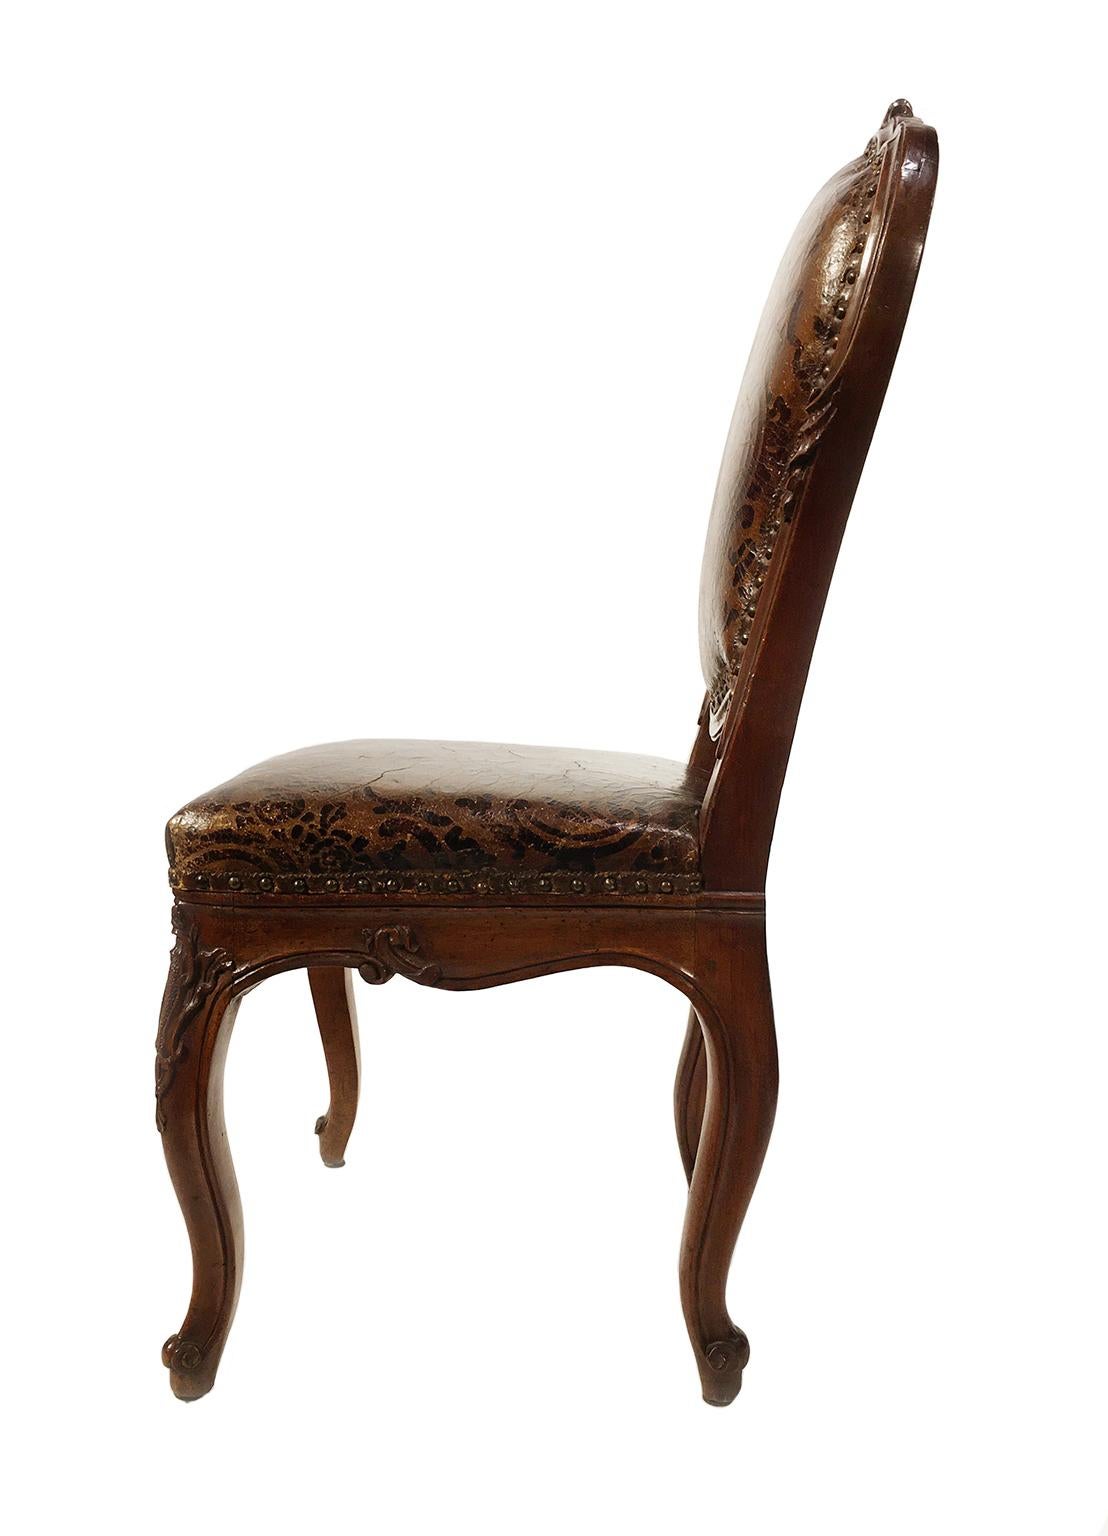 Italian Carved Walnut Chairs with Leather Covers, Milan, circa 1750 For Sale 1